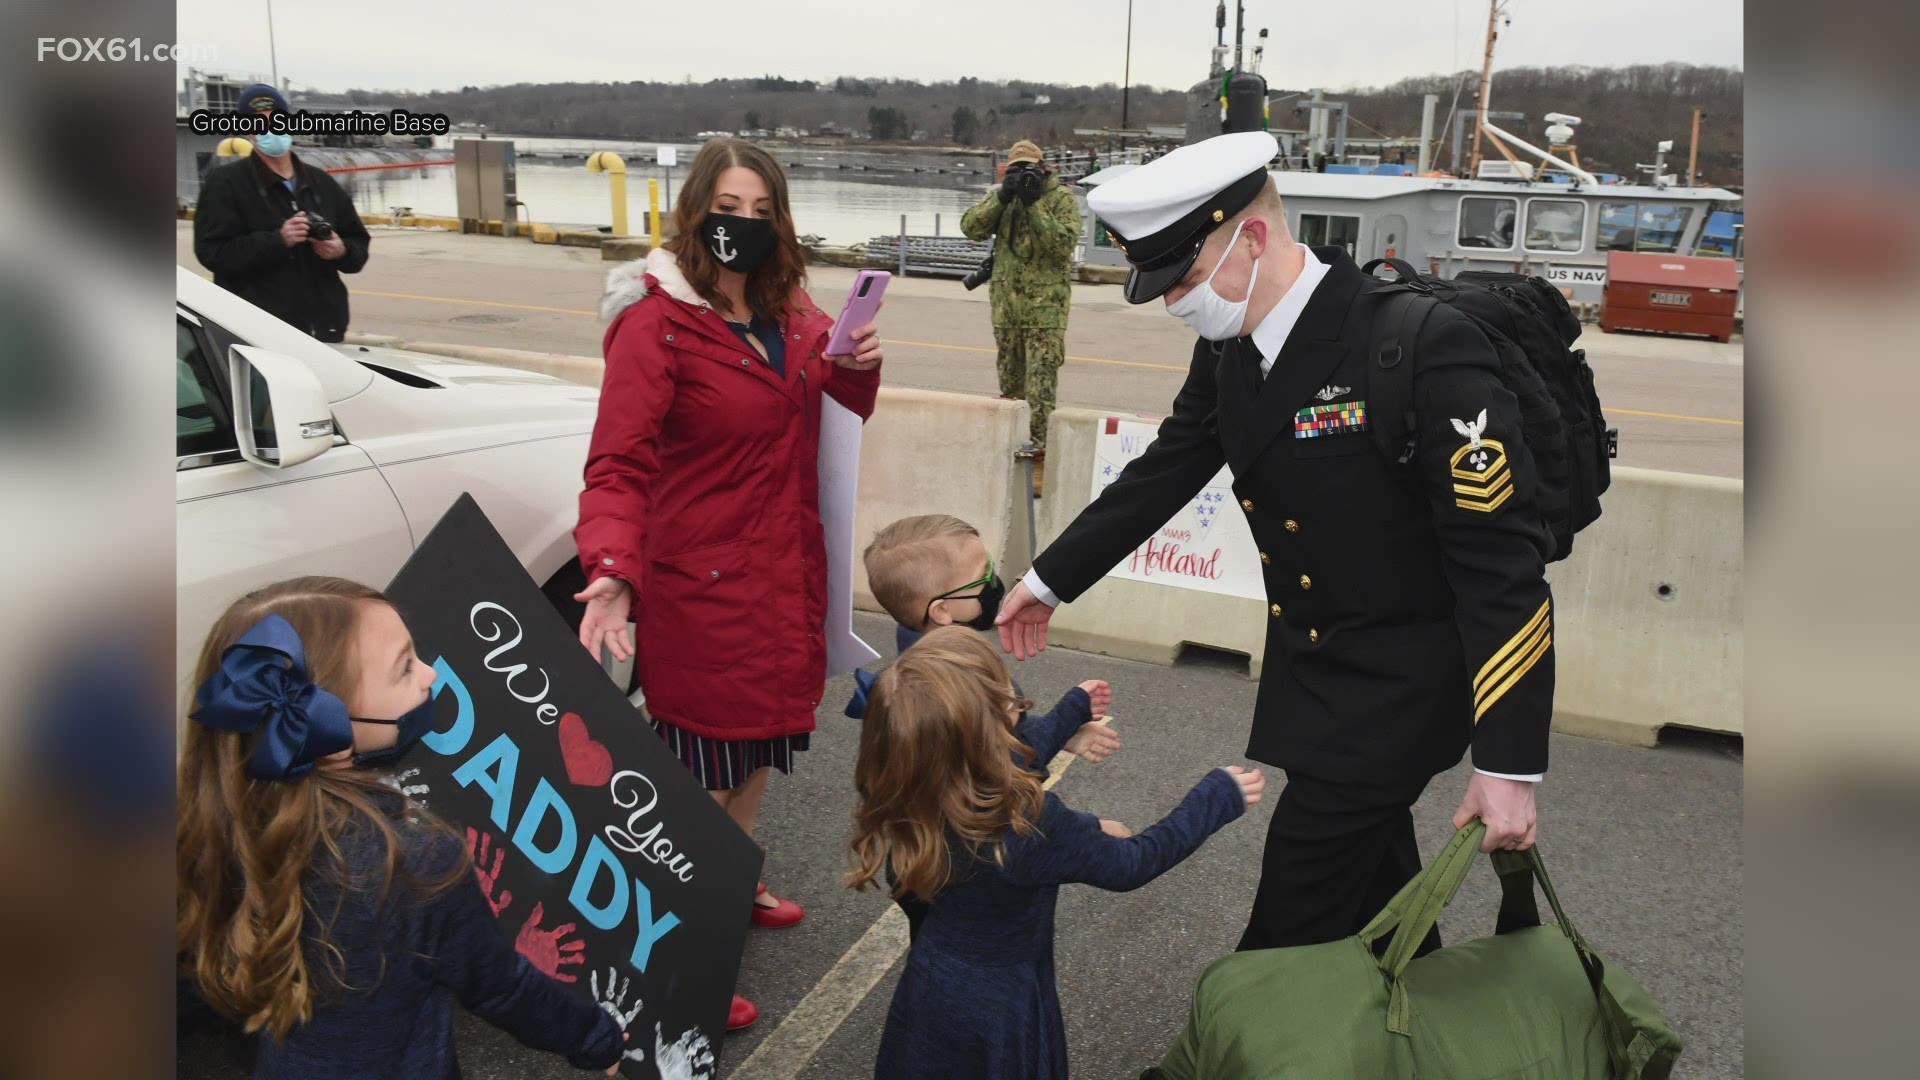 After six months of deployment, the crew returned to the Groton Sub base on January 11.